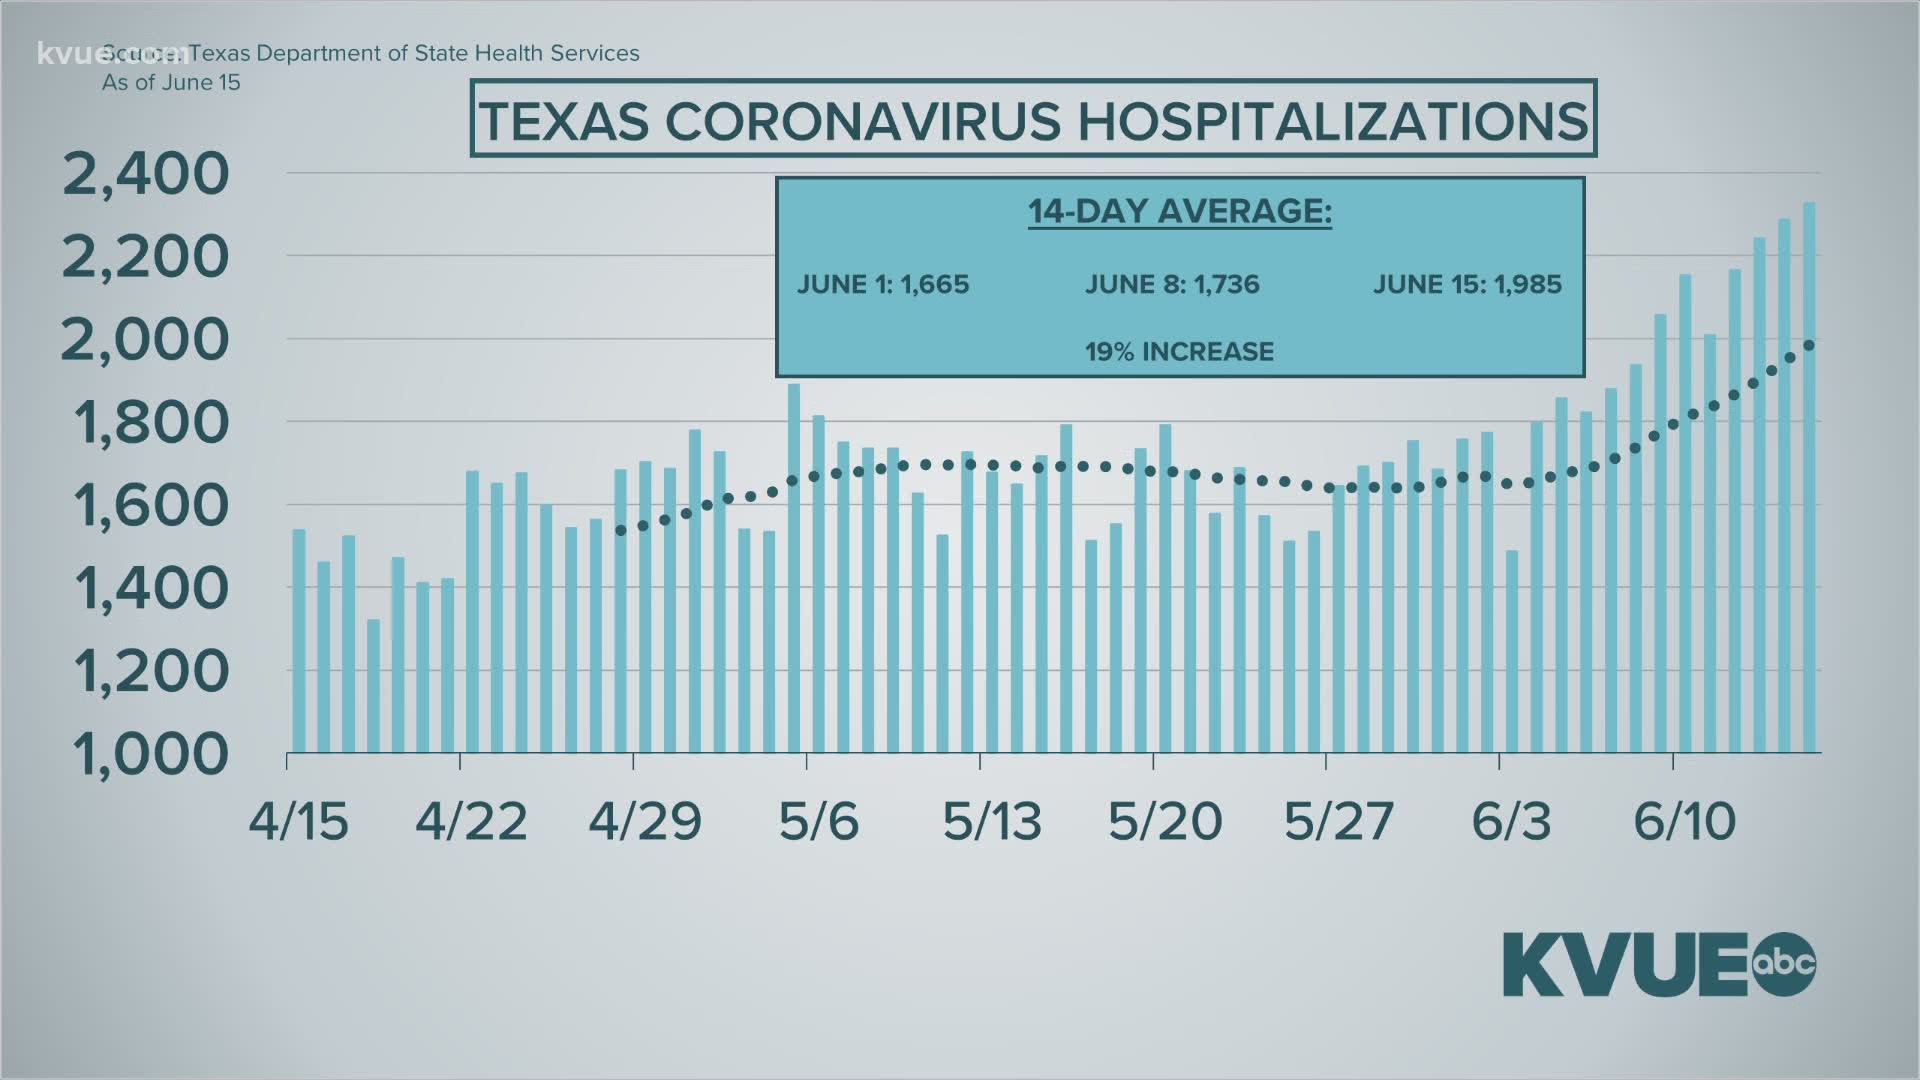 Gov. Abbott will give an update on hospital capacity on Tuesday. Bob Buckalew tells us what the increasing hospitalization numbers mean for people in Travis County.